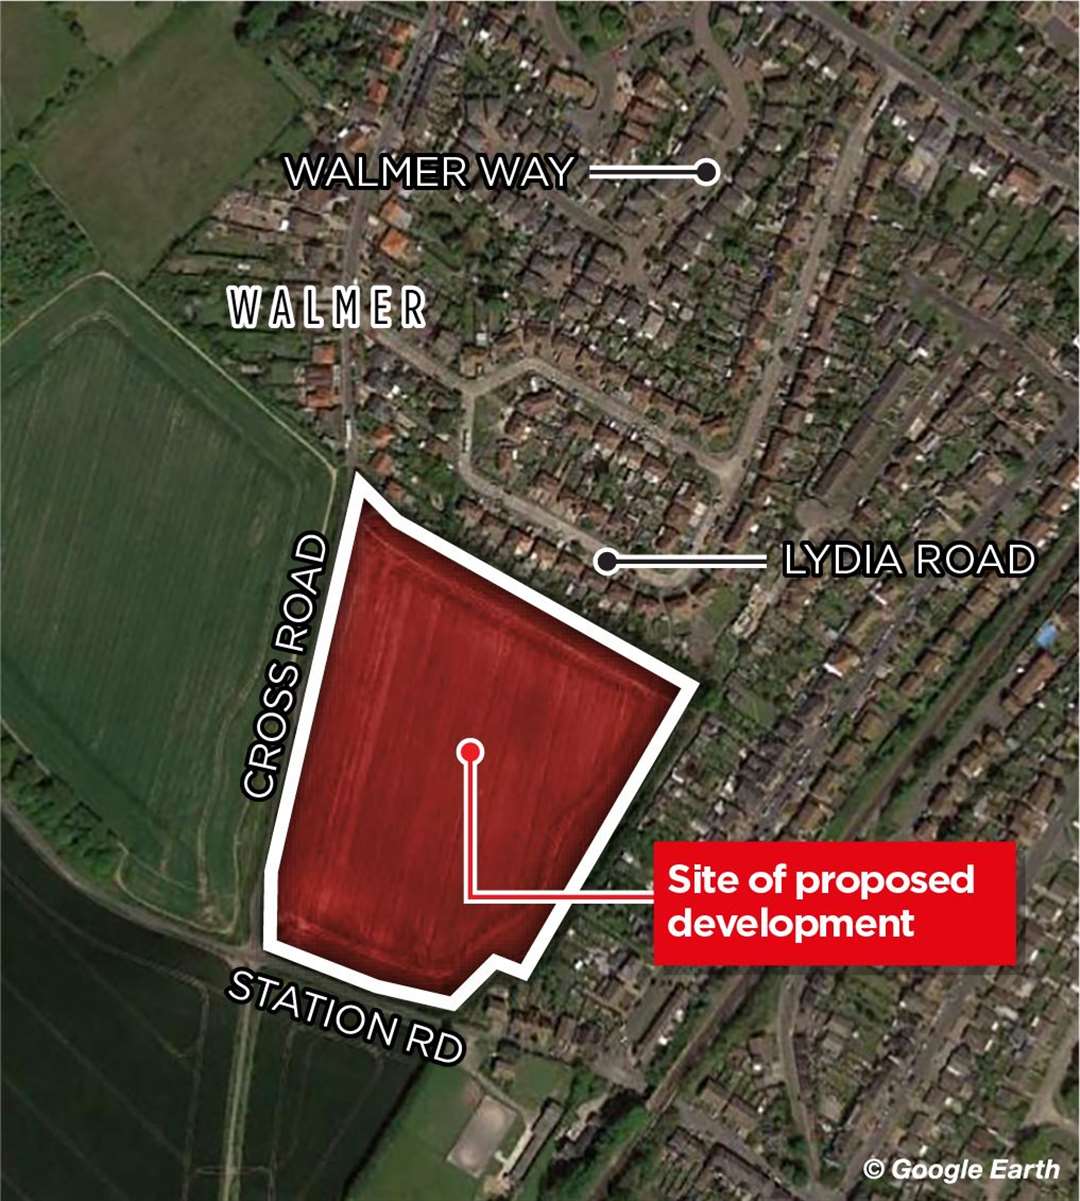 The proposed housing site in relation to Walmer Way